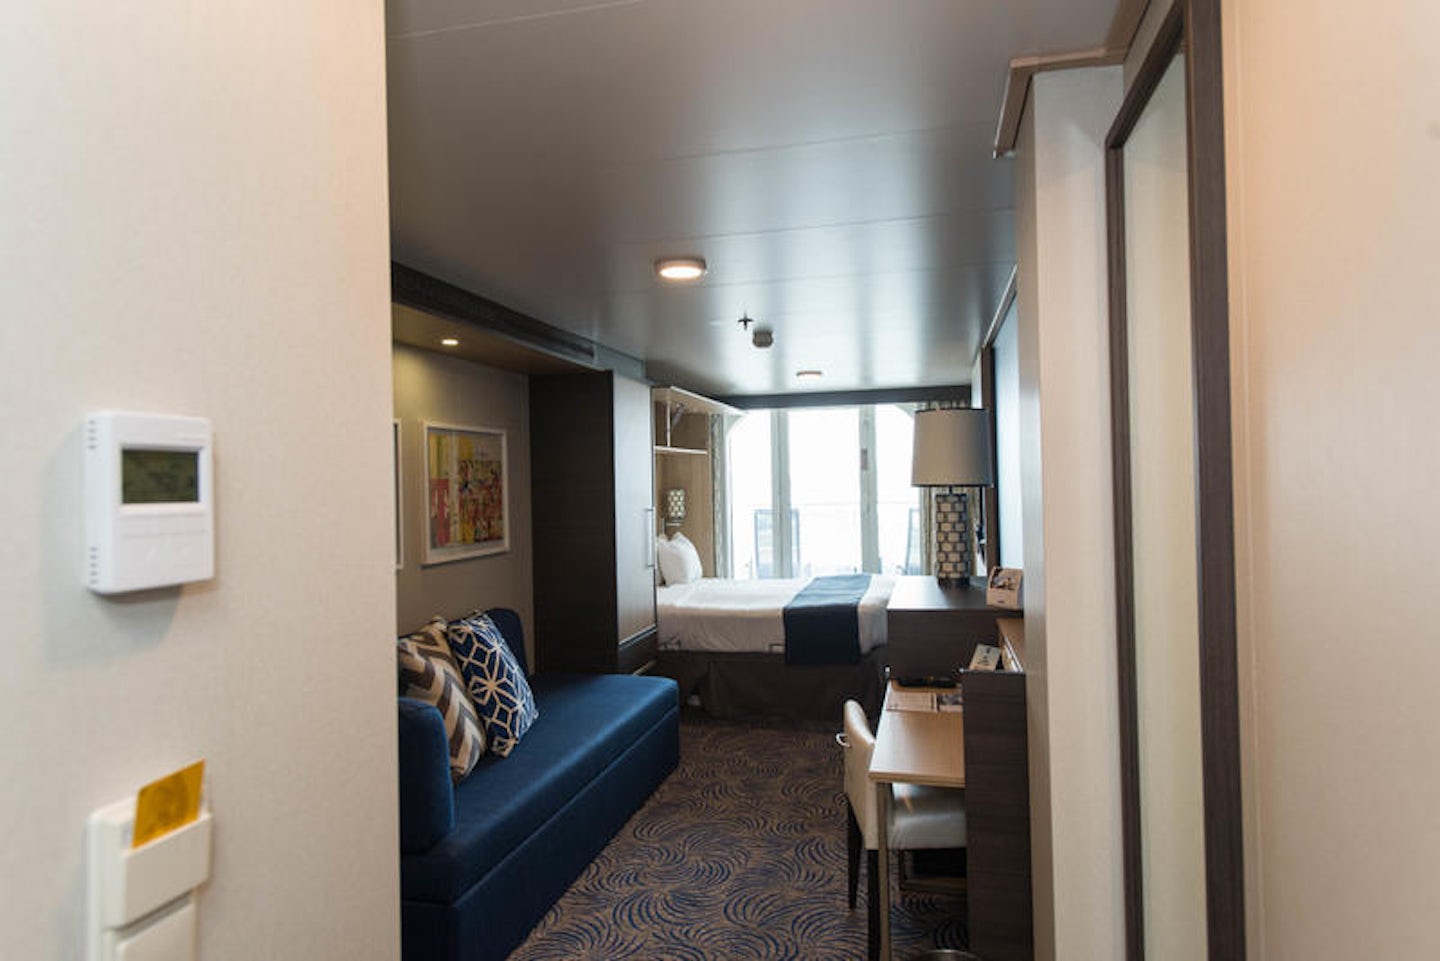 The Superior Ocean-View Cabin with Balcony on Anthem of the Seas